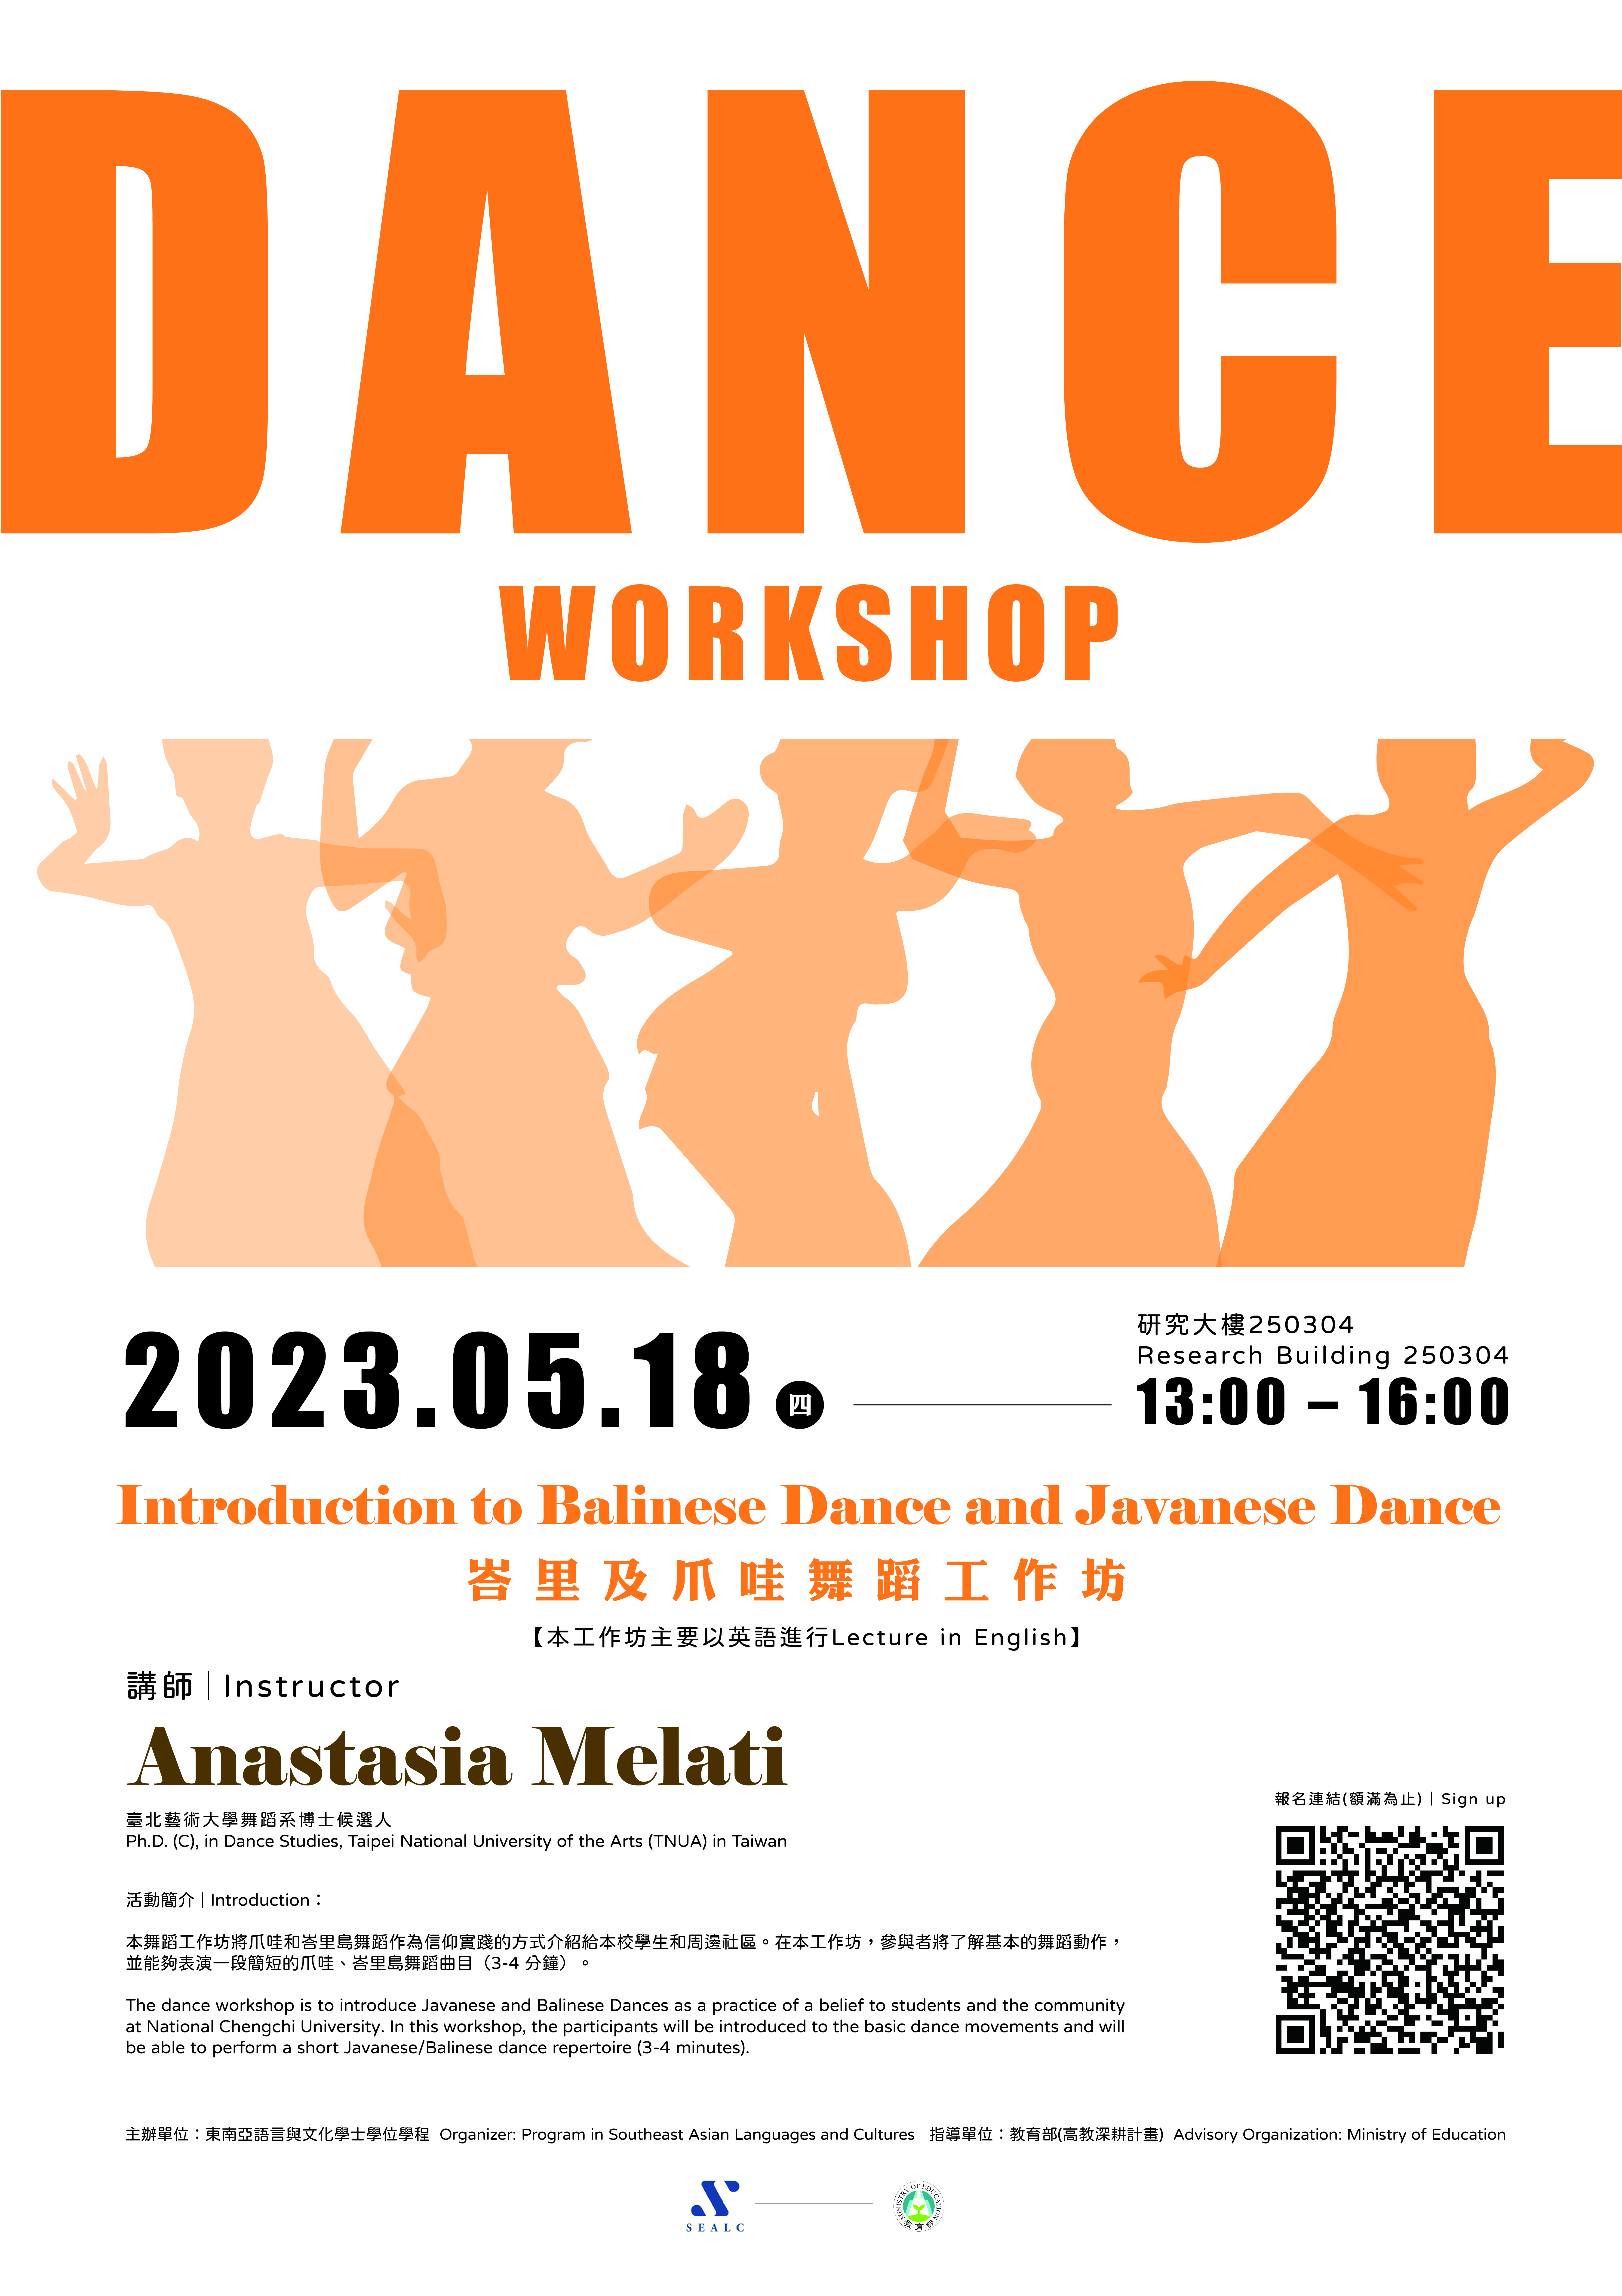 【Workshop】Dance Workshop Introduction to Balinese Dance and Javanese Dance